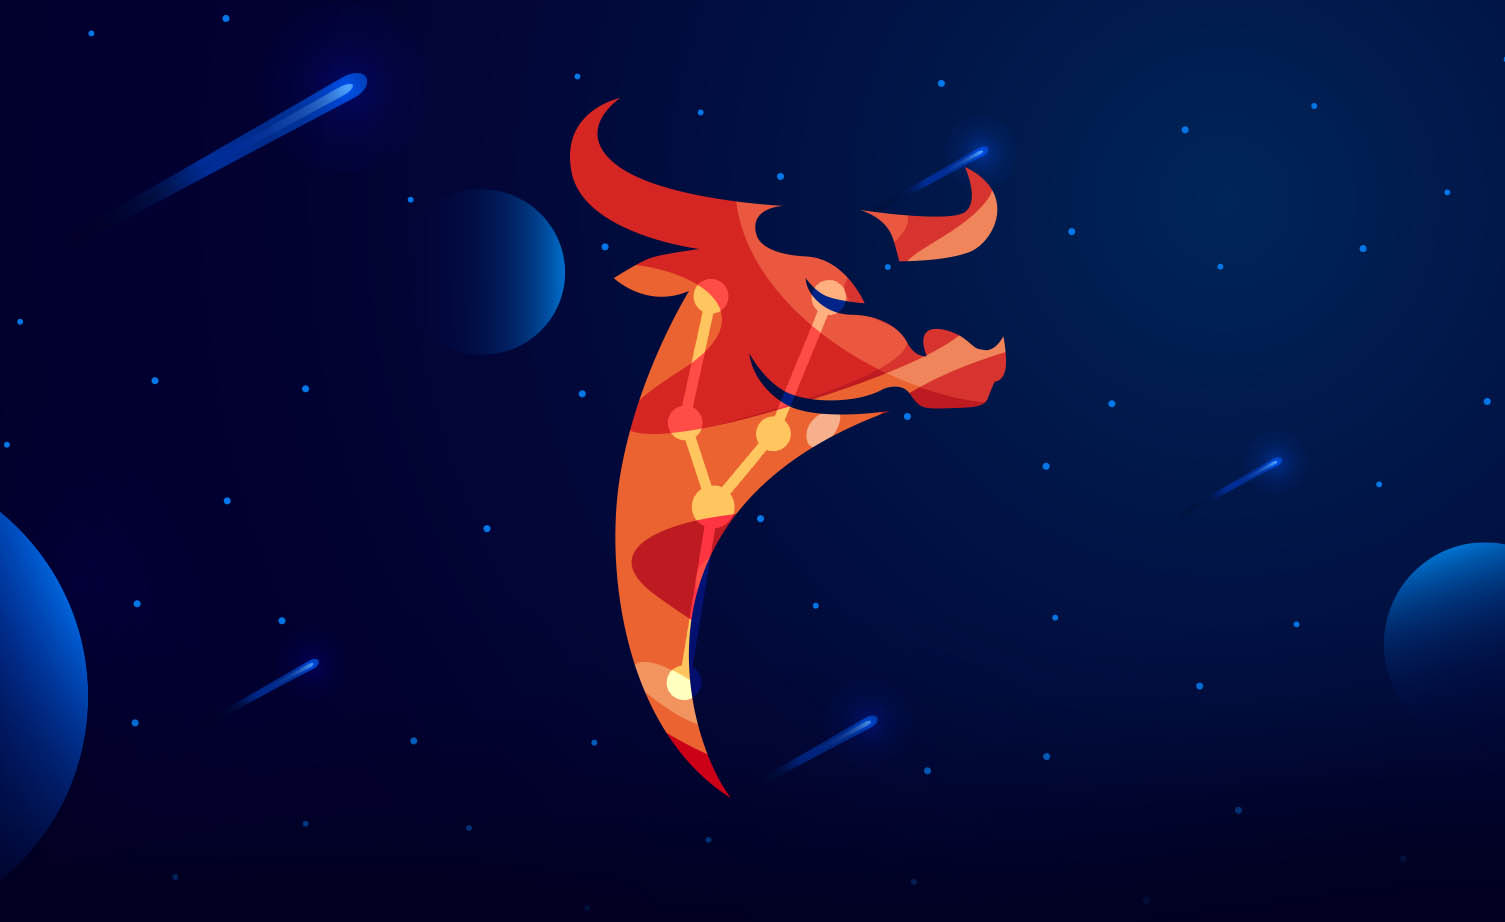 A pictorial representation of the threat actor group Playful Taurus showing an illustration of an orange bull’s head against the background of a blue night sky. Included is the constellation of Taurus.